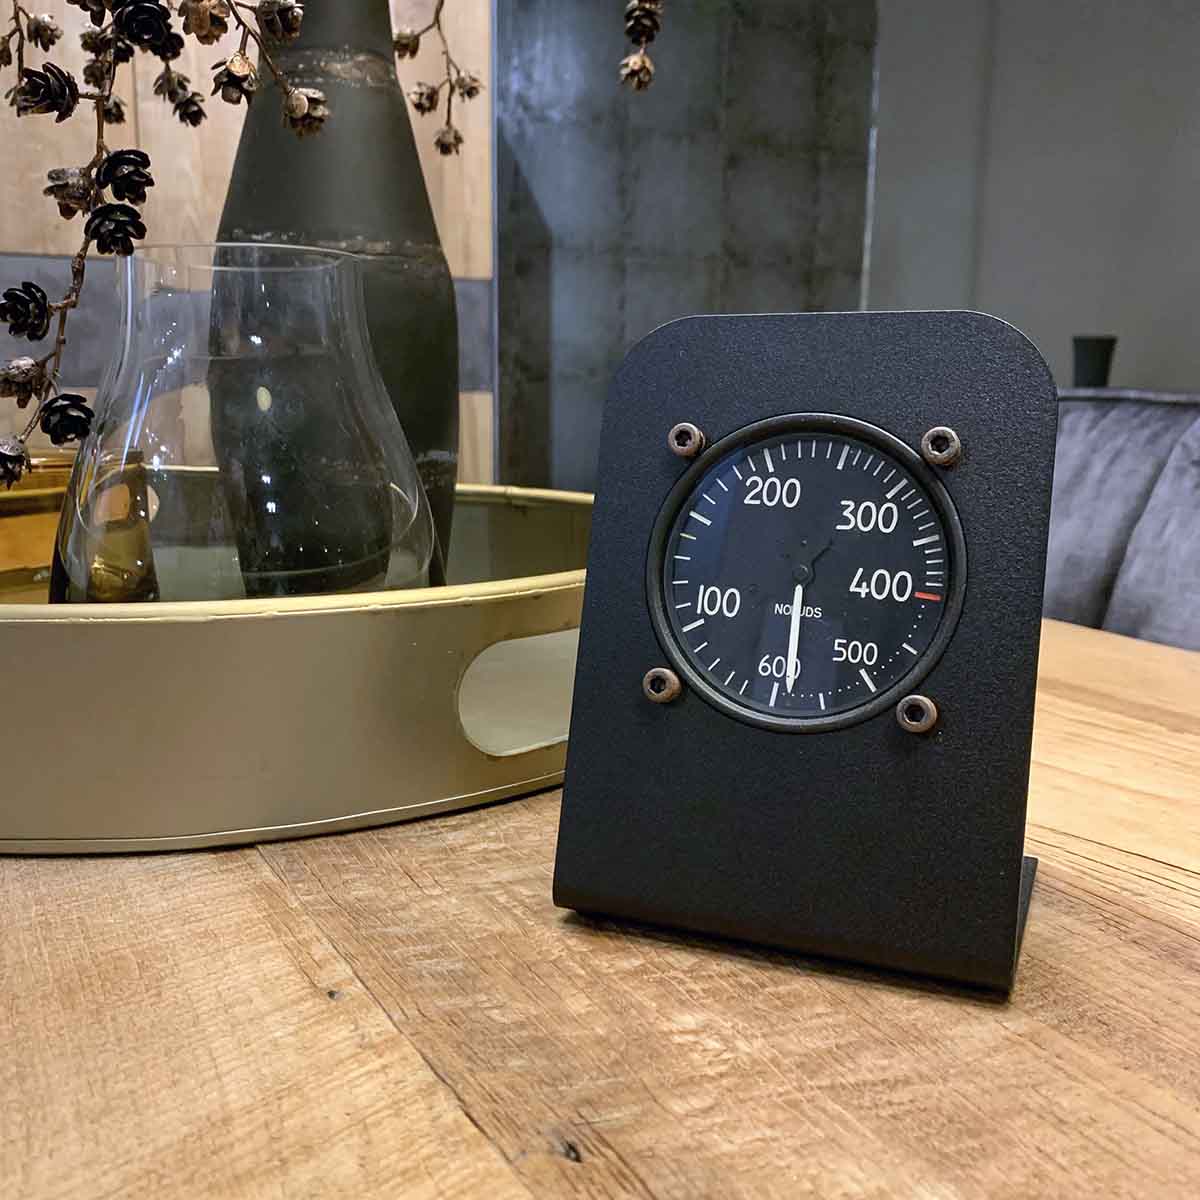 Fouga CM-170 Magister airspeed indicator for sale.